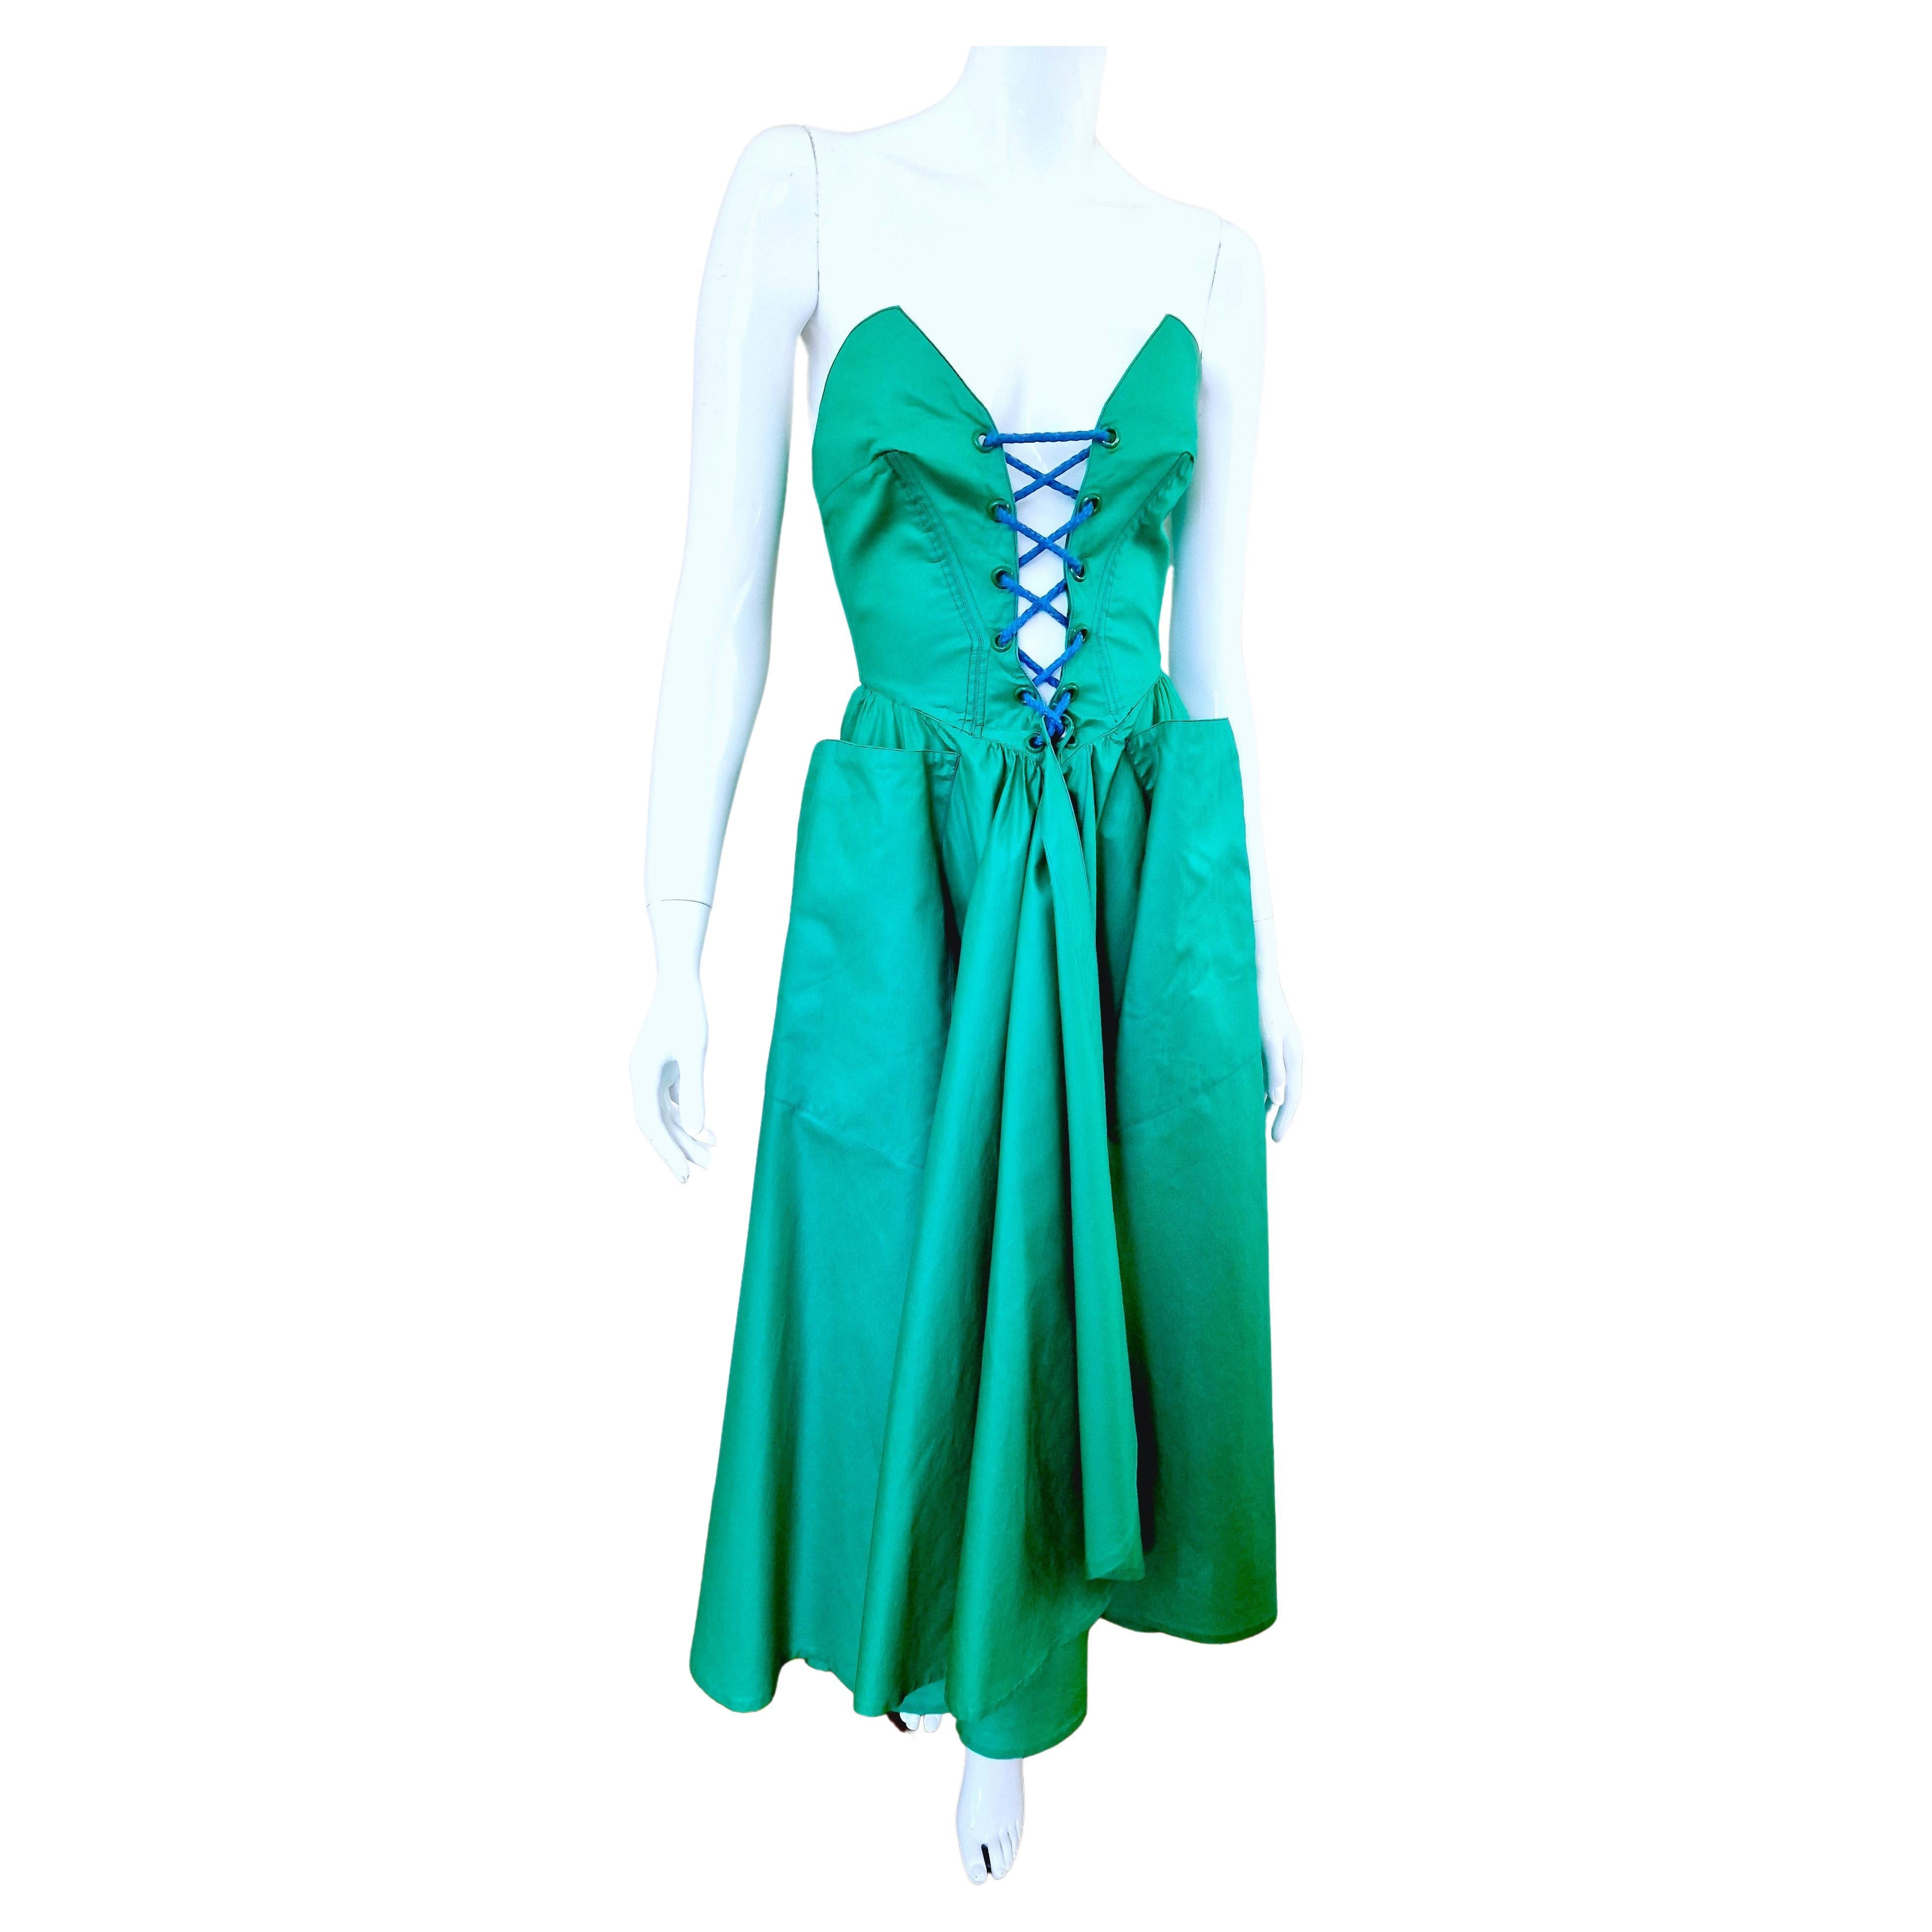 Thierry Mugler Corset Lace Up Green Vintage Couture Gown Prom Bustier Dress en vente